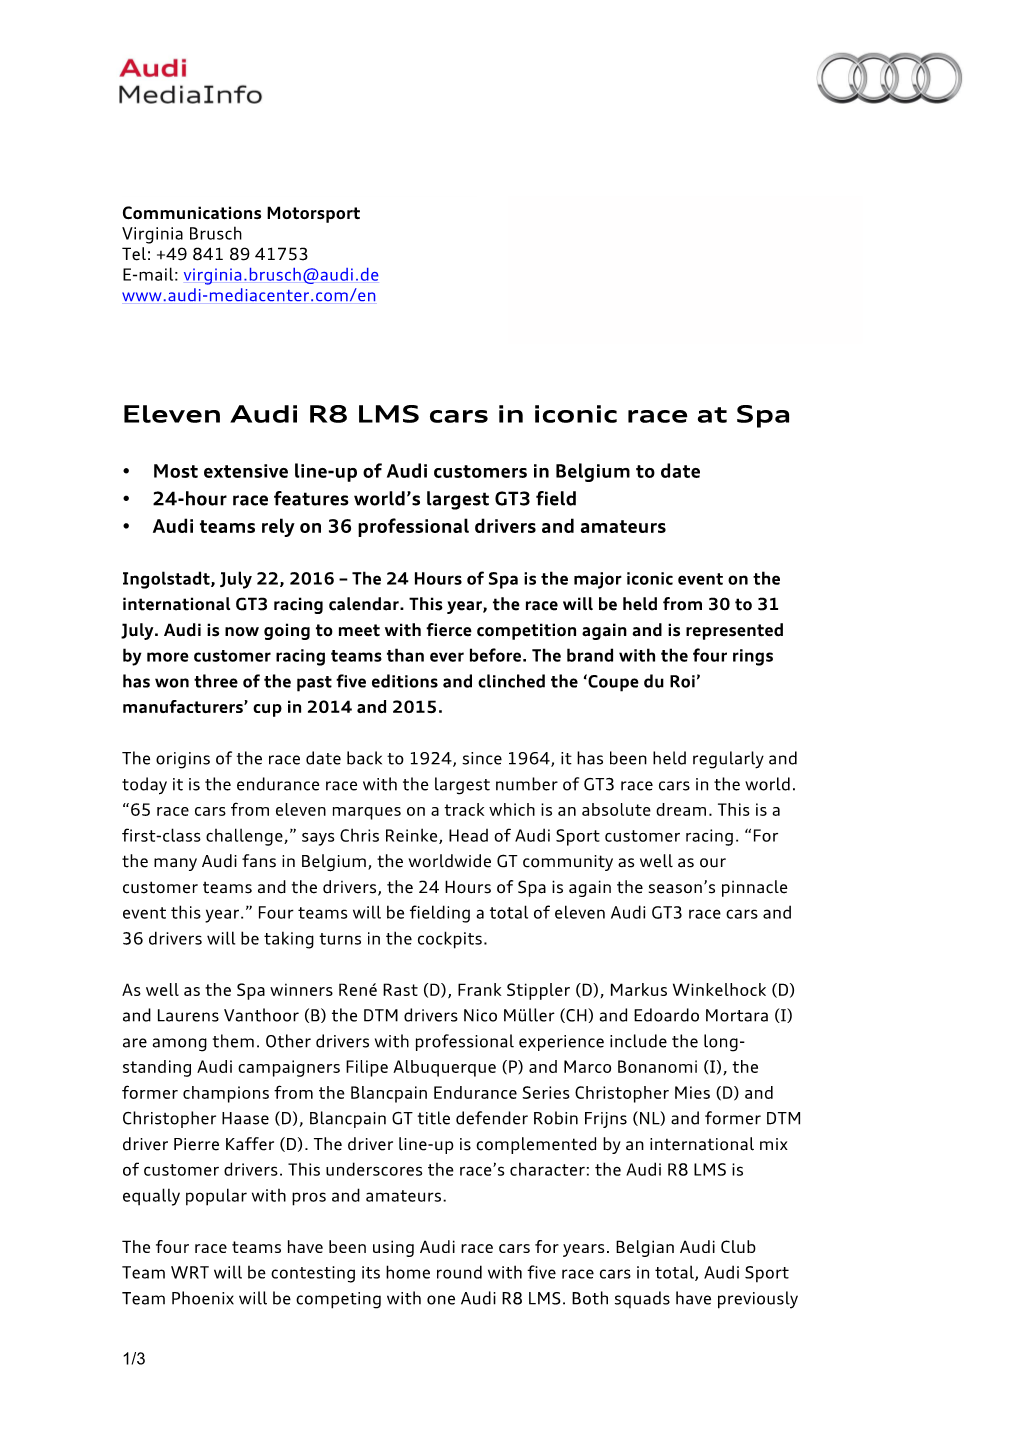 Eleven Audi R8 LMS Cars in Iconic Race at Spa